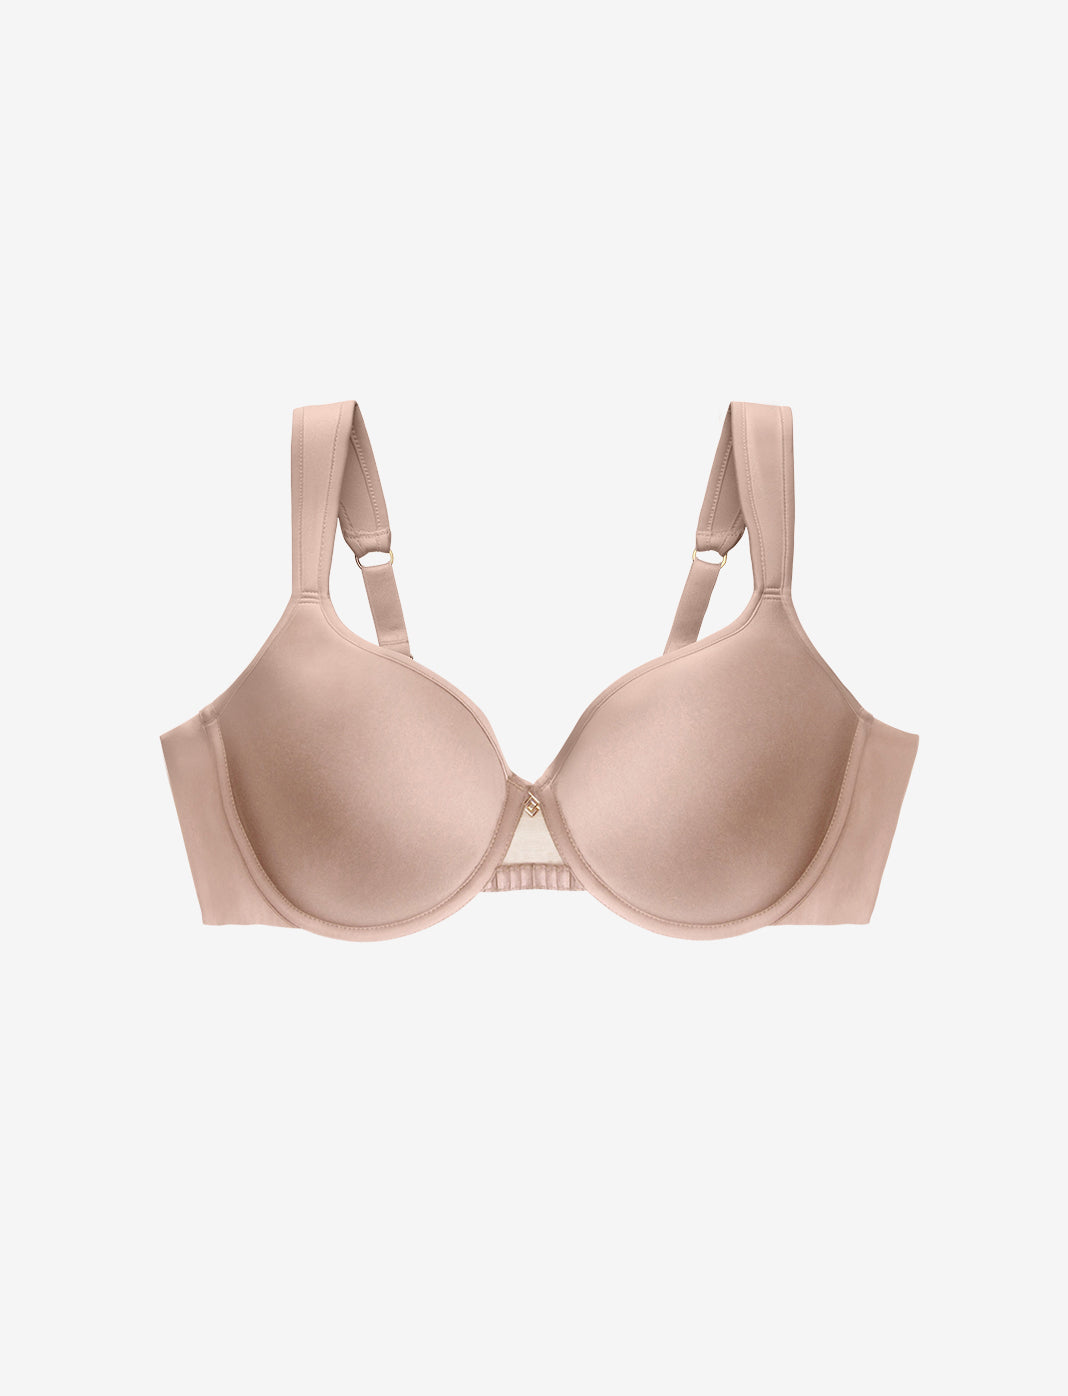 Best Bras for Relaxed Breast Shapes - Bras for Relaxed Breasts